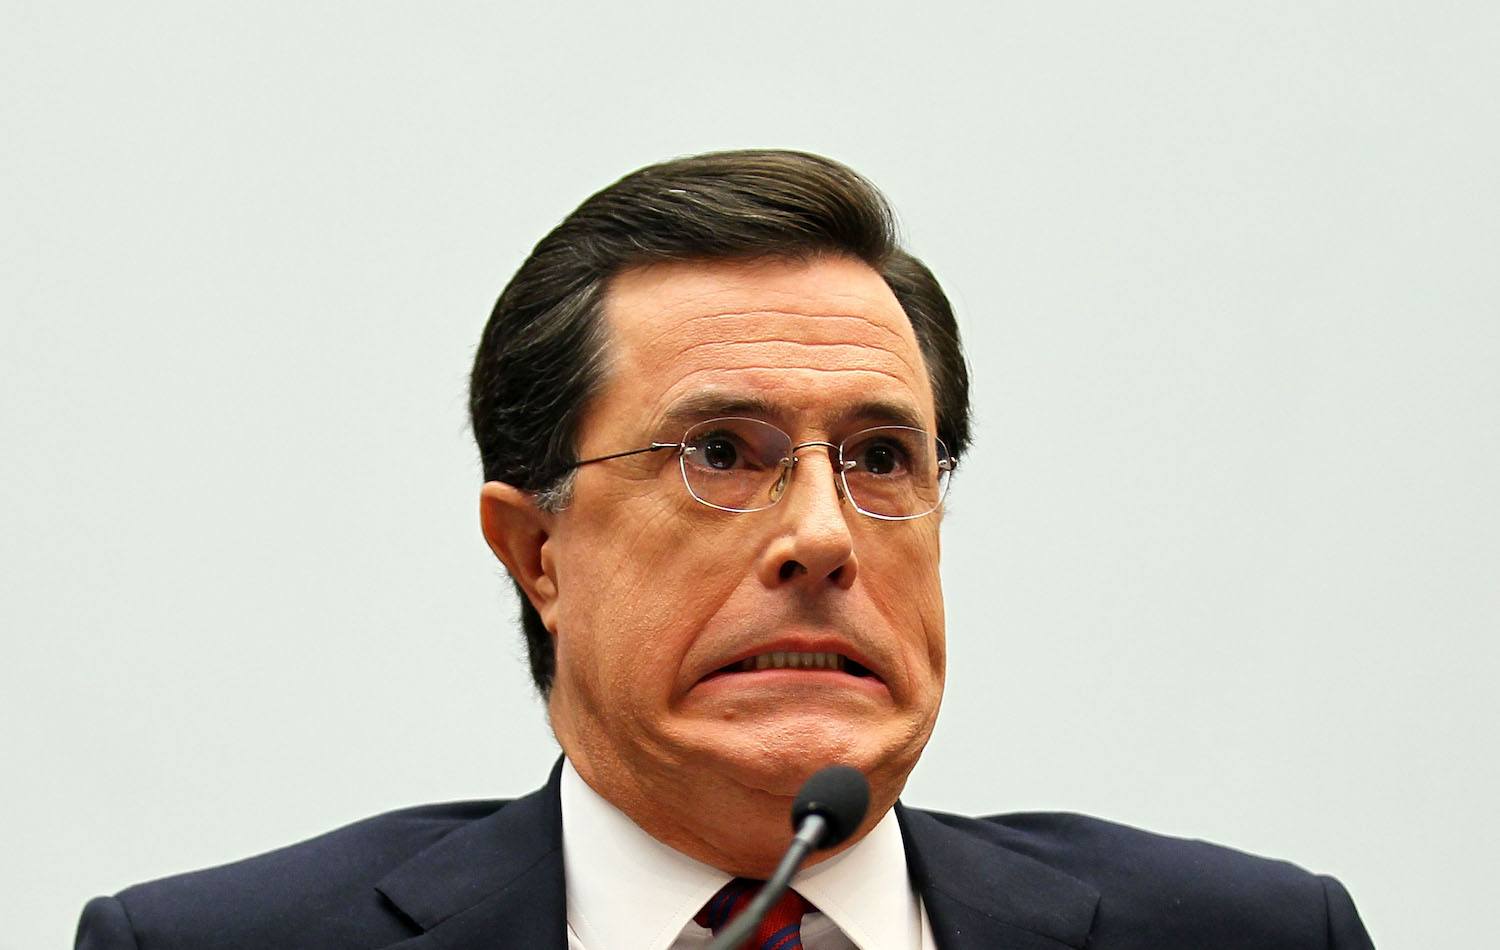 Stephen Colbert makes a face while talking into a mic